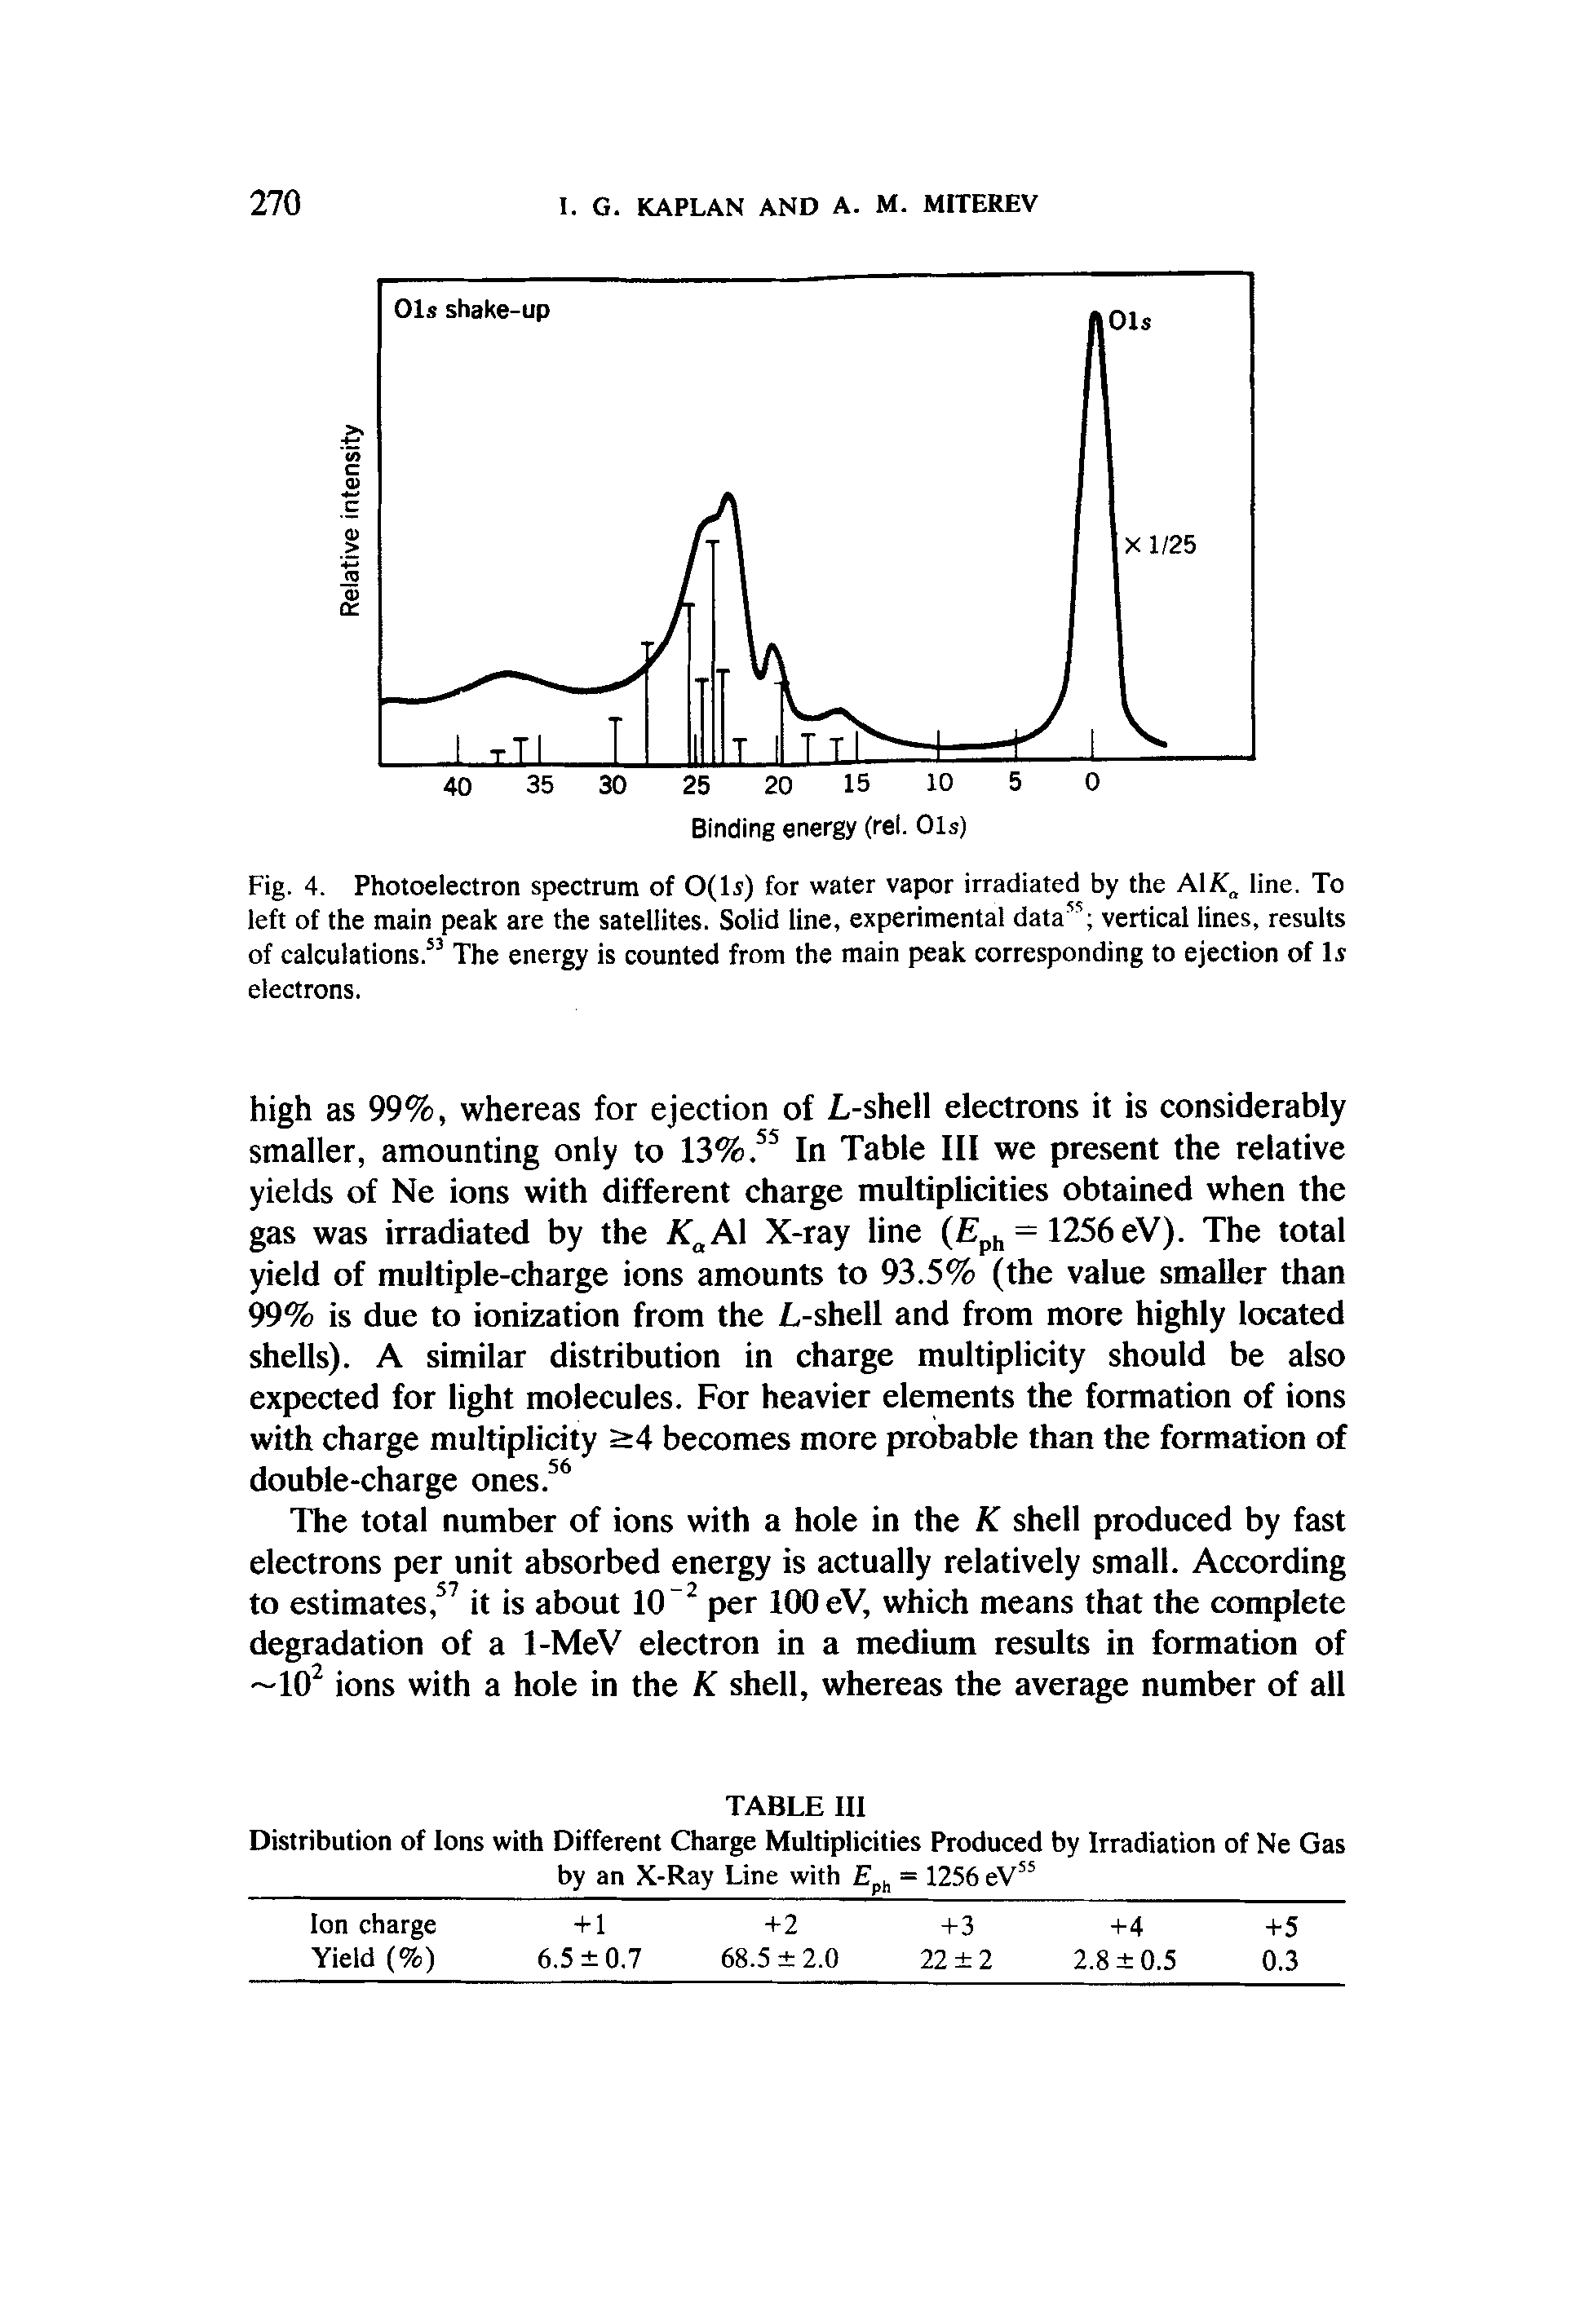 Fig. 4. Photoelectron spectrum of O(ls) for water vapor irradiated by the A1X line. To left of the main peak are the satellites. Solid line, experimental data vertical lines, results of calculations.53 The energy is counted from the main peak corresponding to ejection of I s electrons.